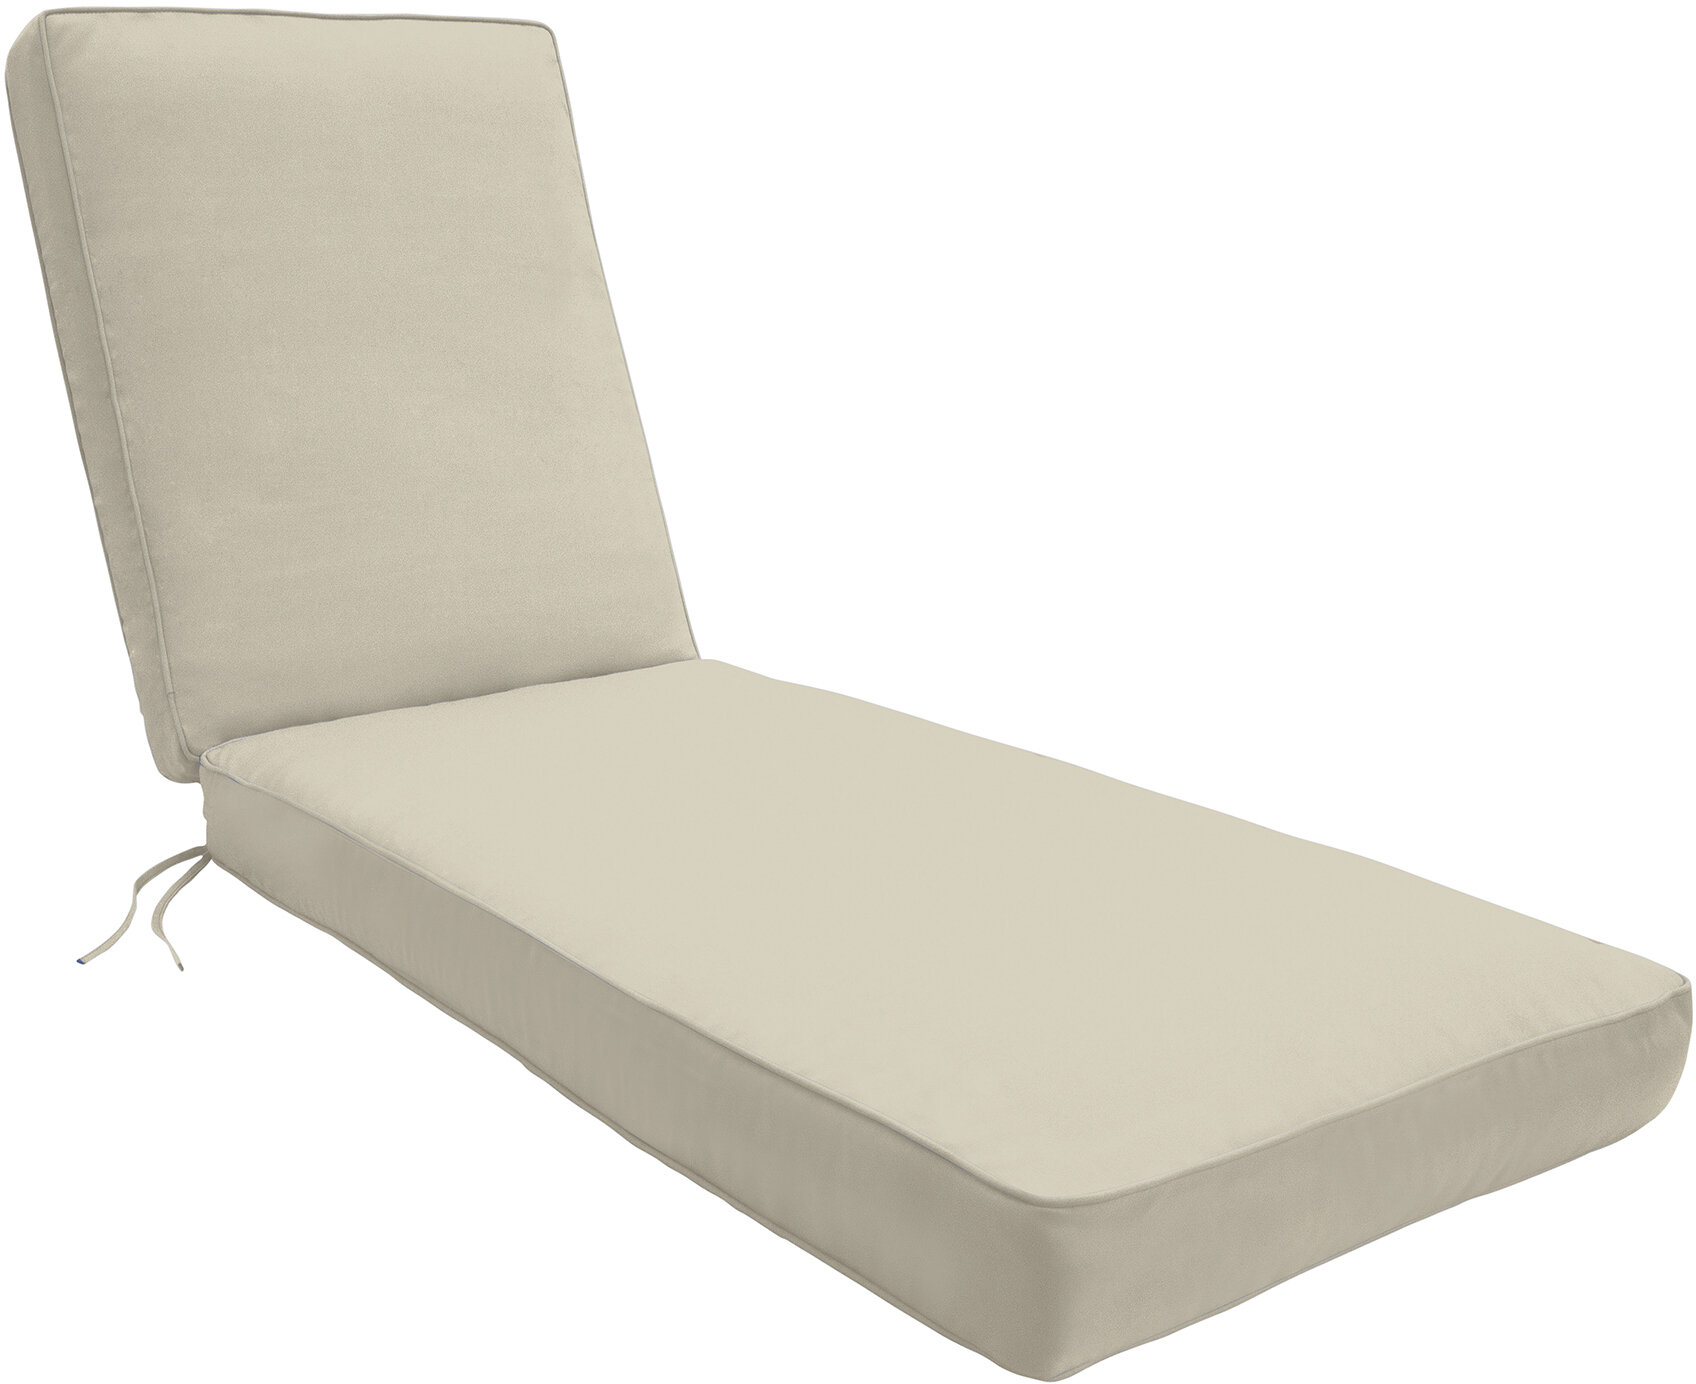 outdoor chaise lounge cushions